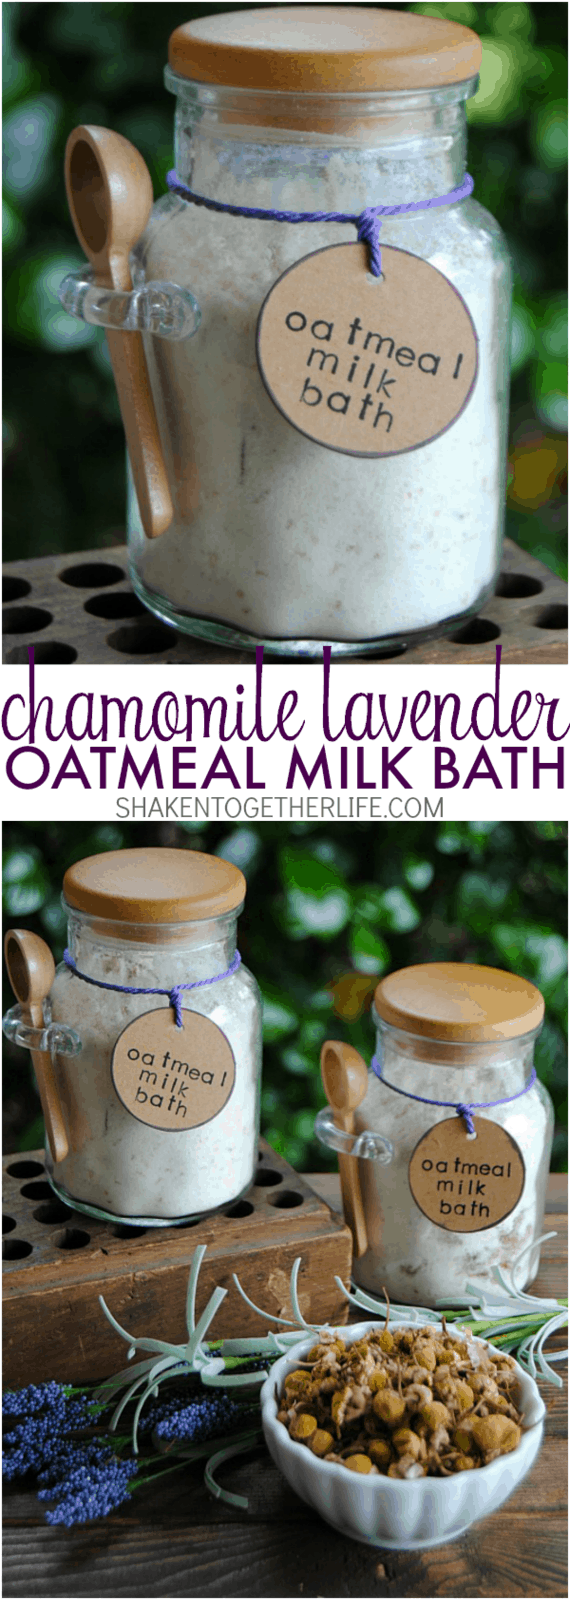 Chamomile Lavender Oatmeal Milk Bath - soothing and pampering and perfect for gifts!